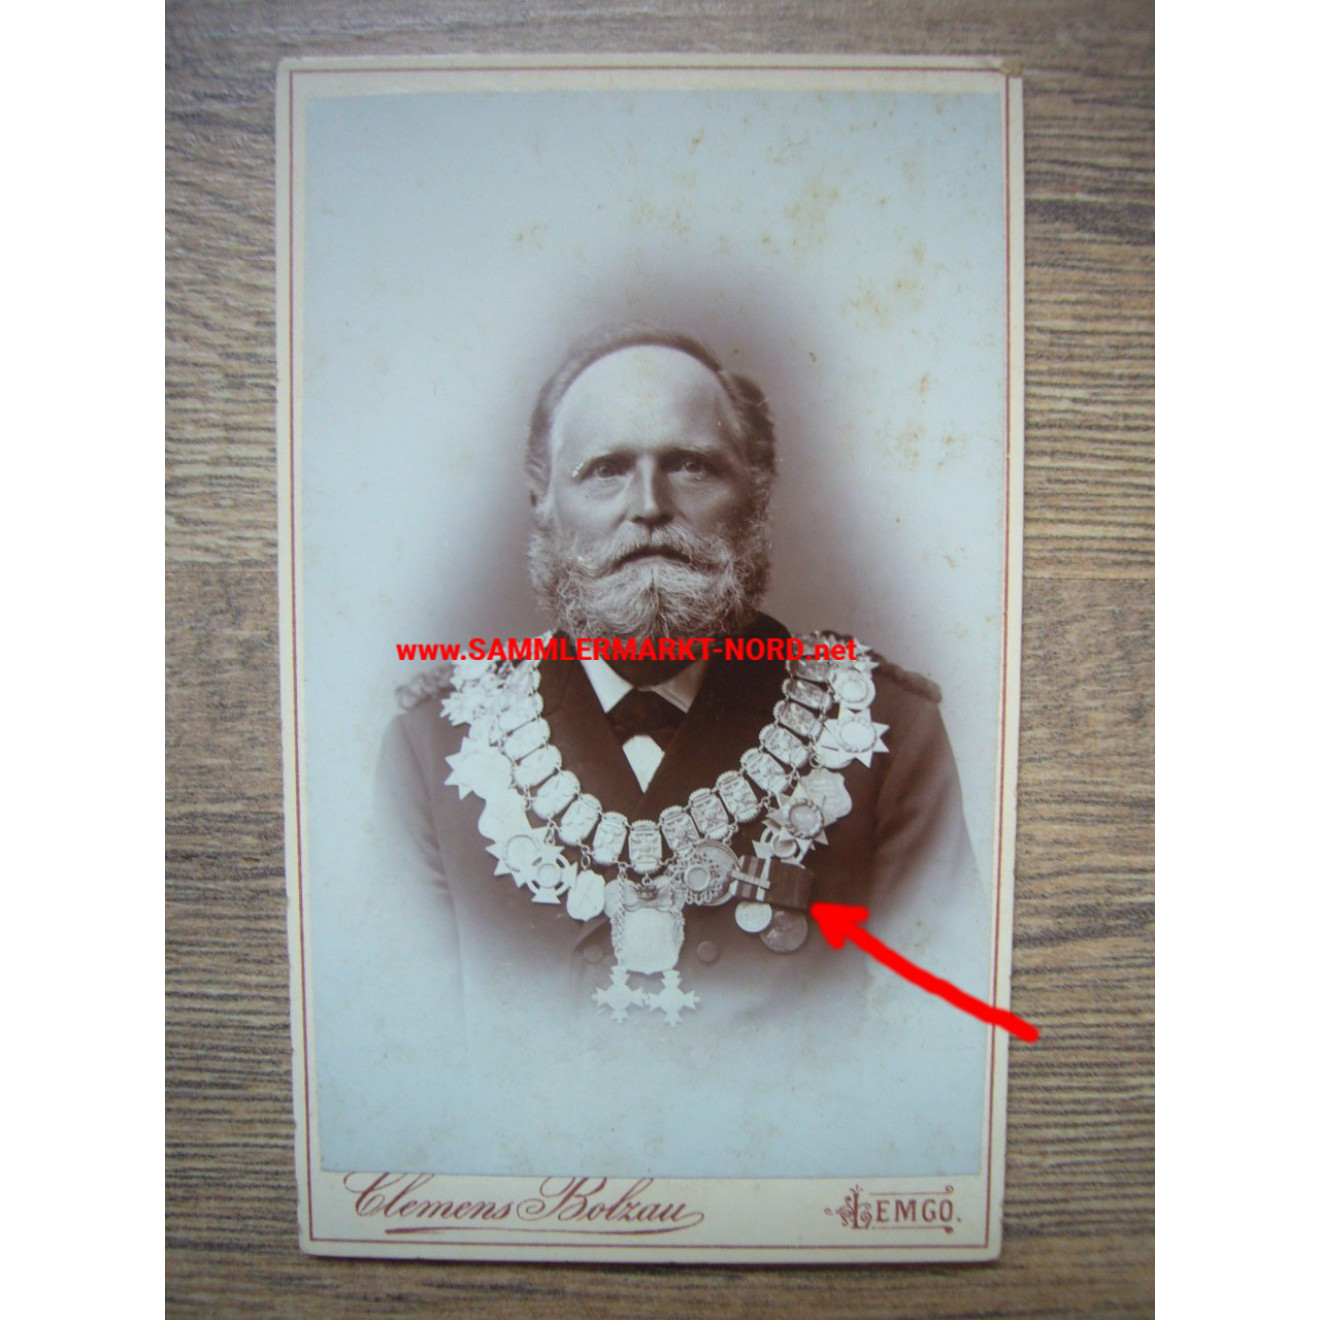 Cabinet photo - Lemgo - Shooting king with medal chain + medal clasp